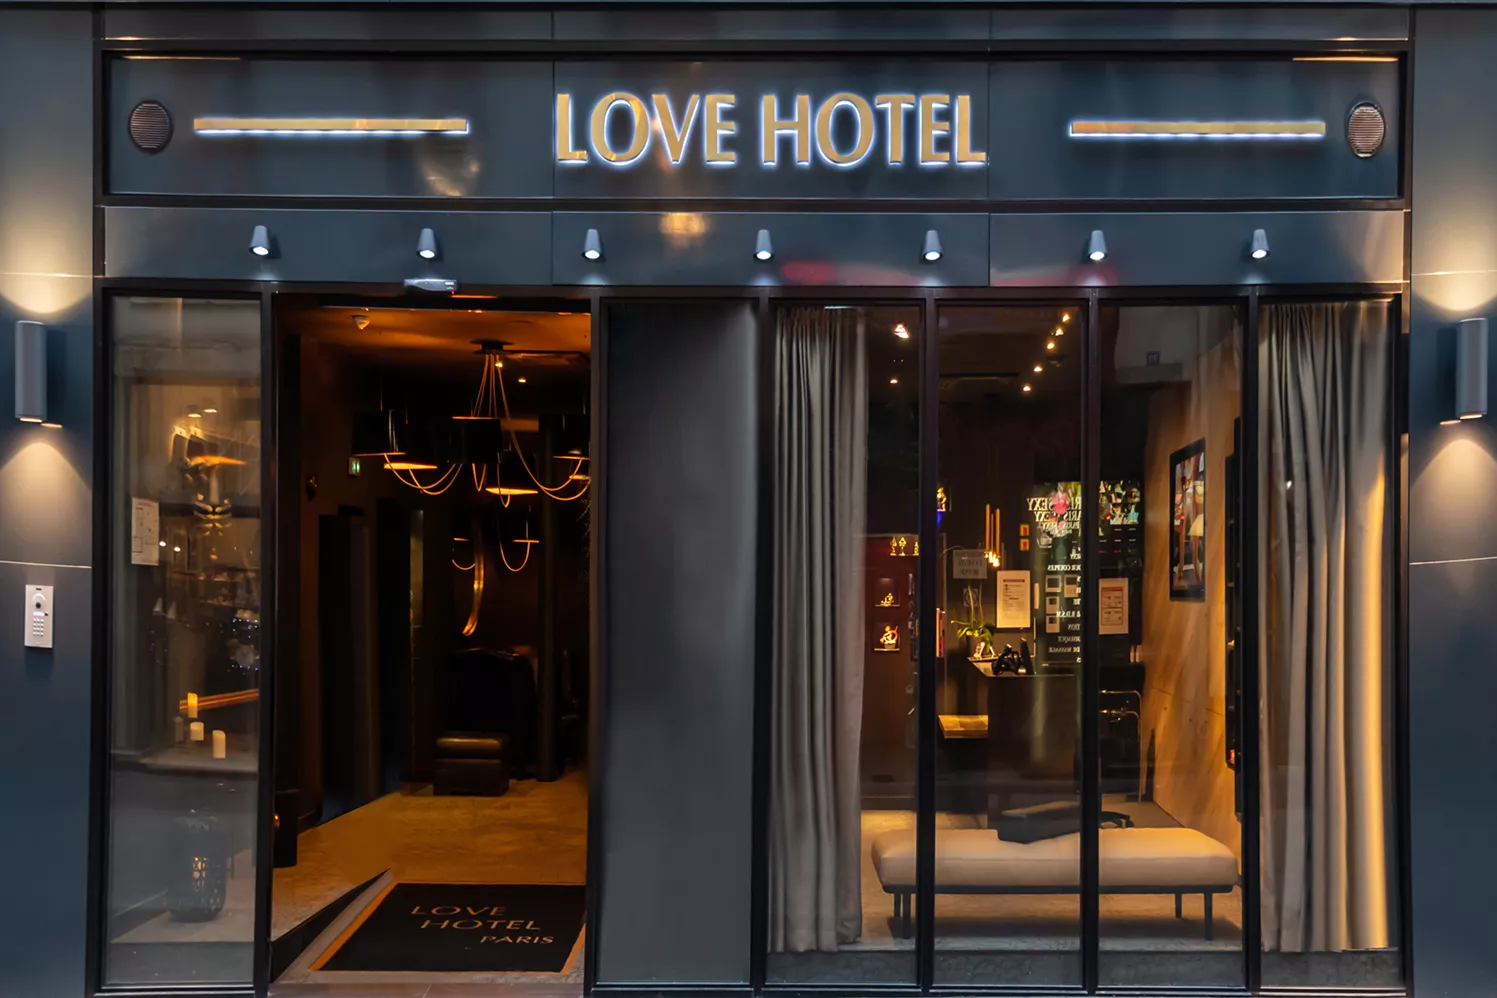 Love Hotel in France, Europe | Sex Hotels,Sex-Friendly Places - Rated 2.7